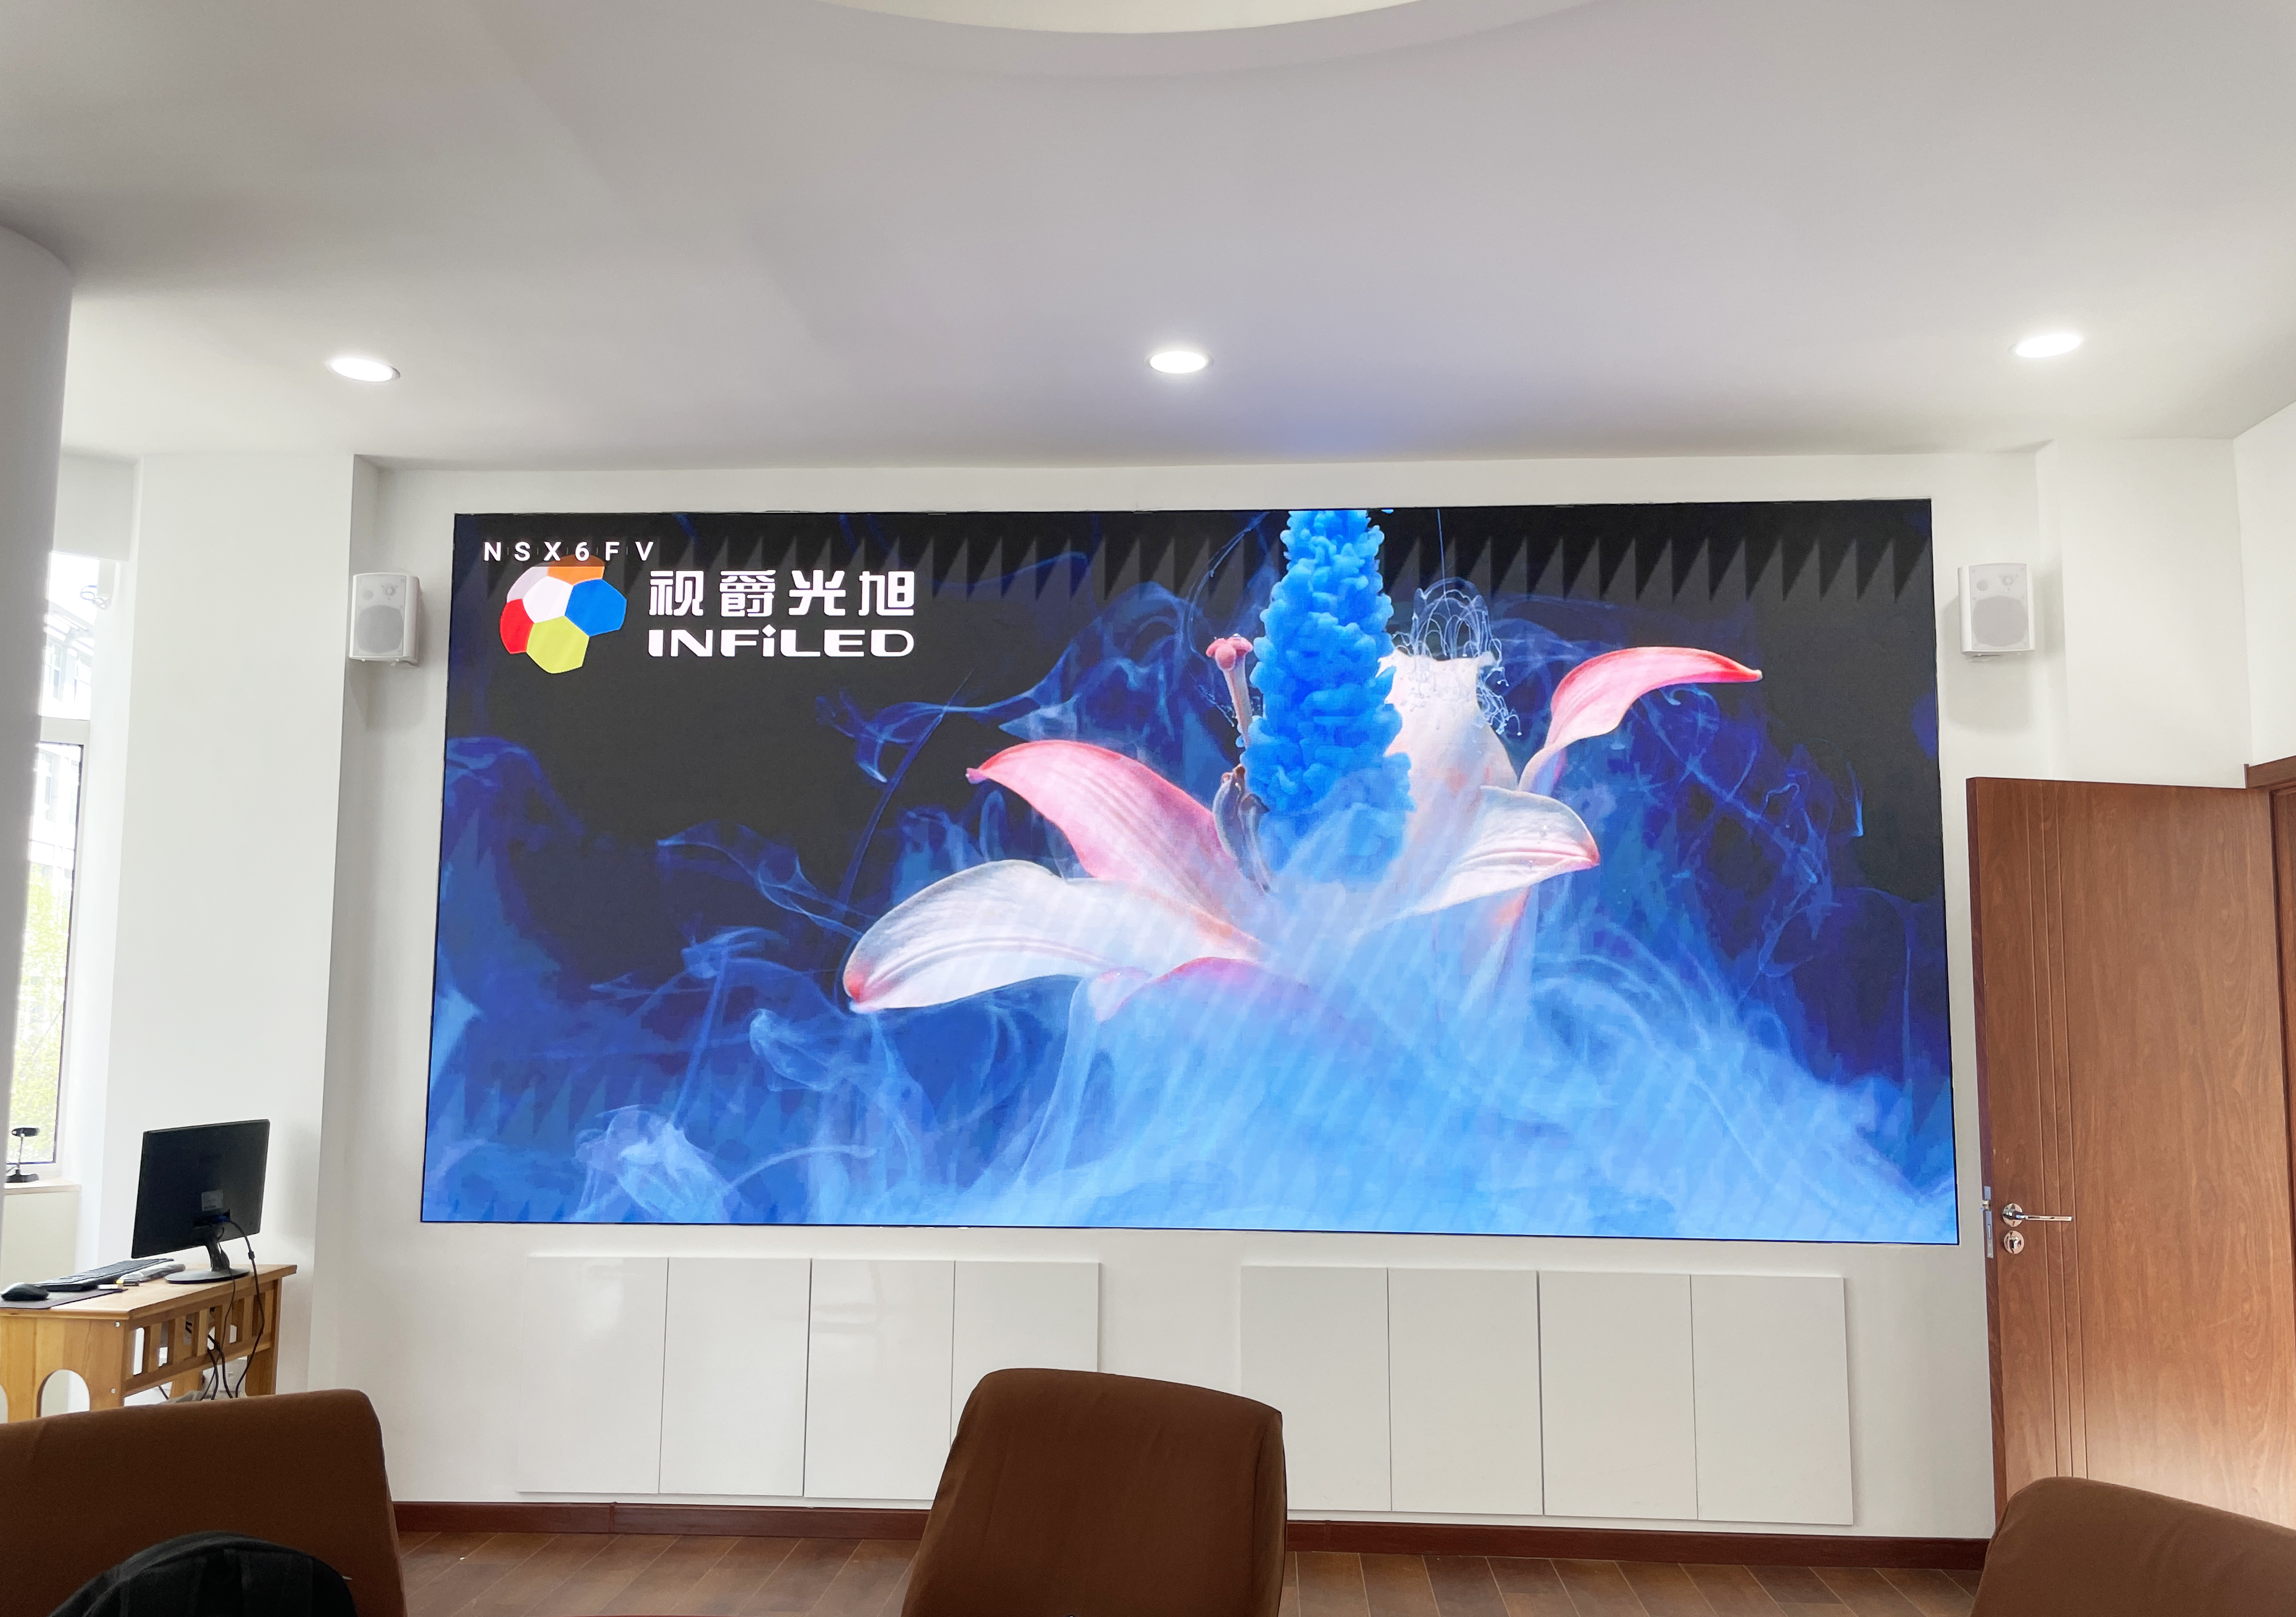 INFiLED provides a LED display solution for Sanding Electric conference room